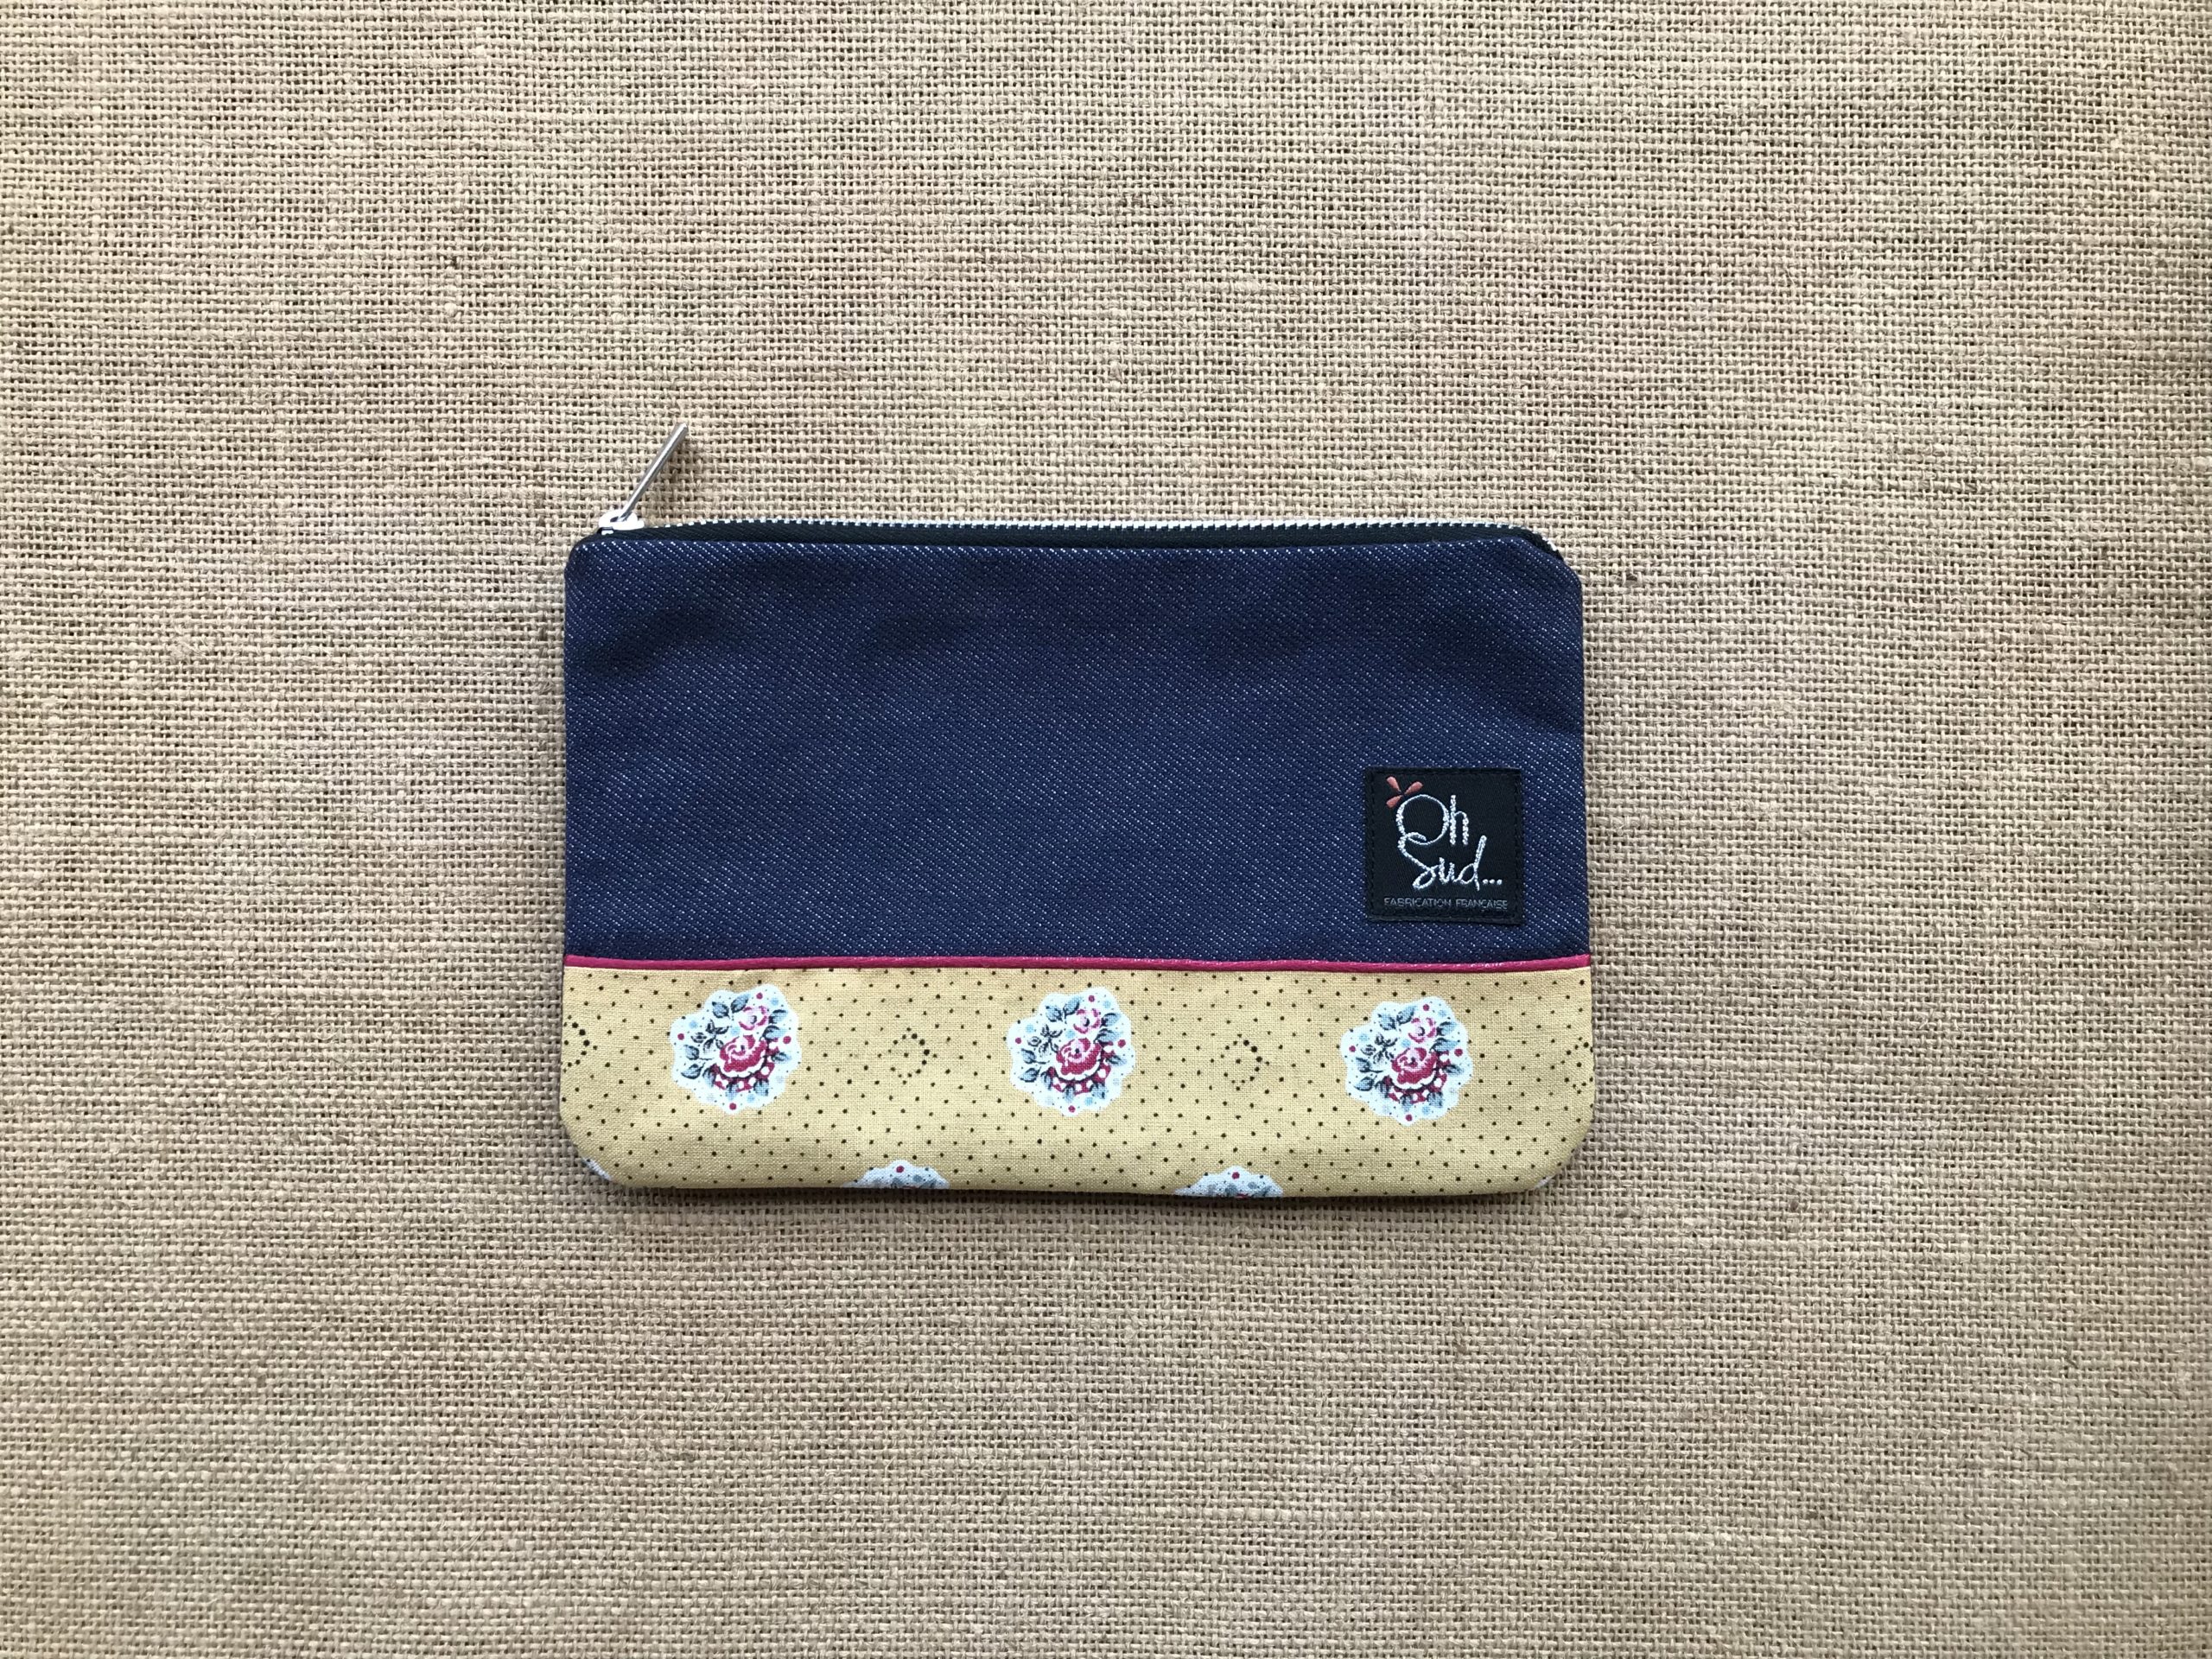 liberty, trousse maquillage, hippie chic, sud, provence